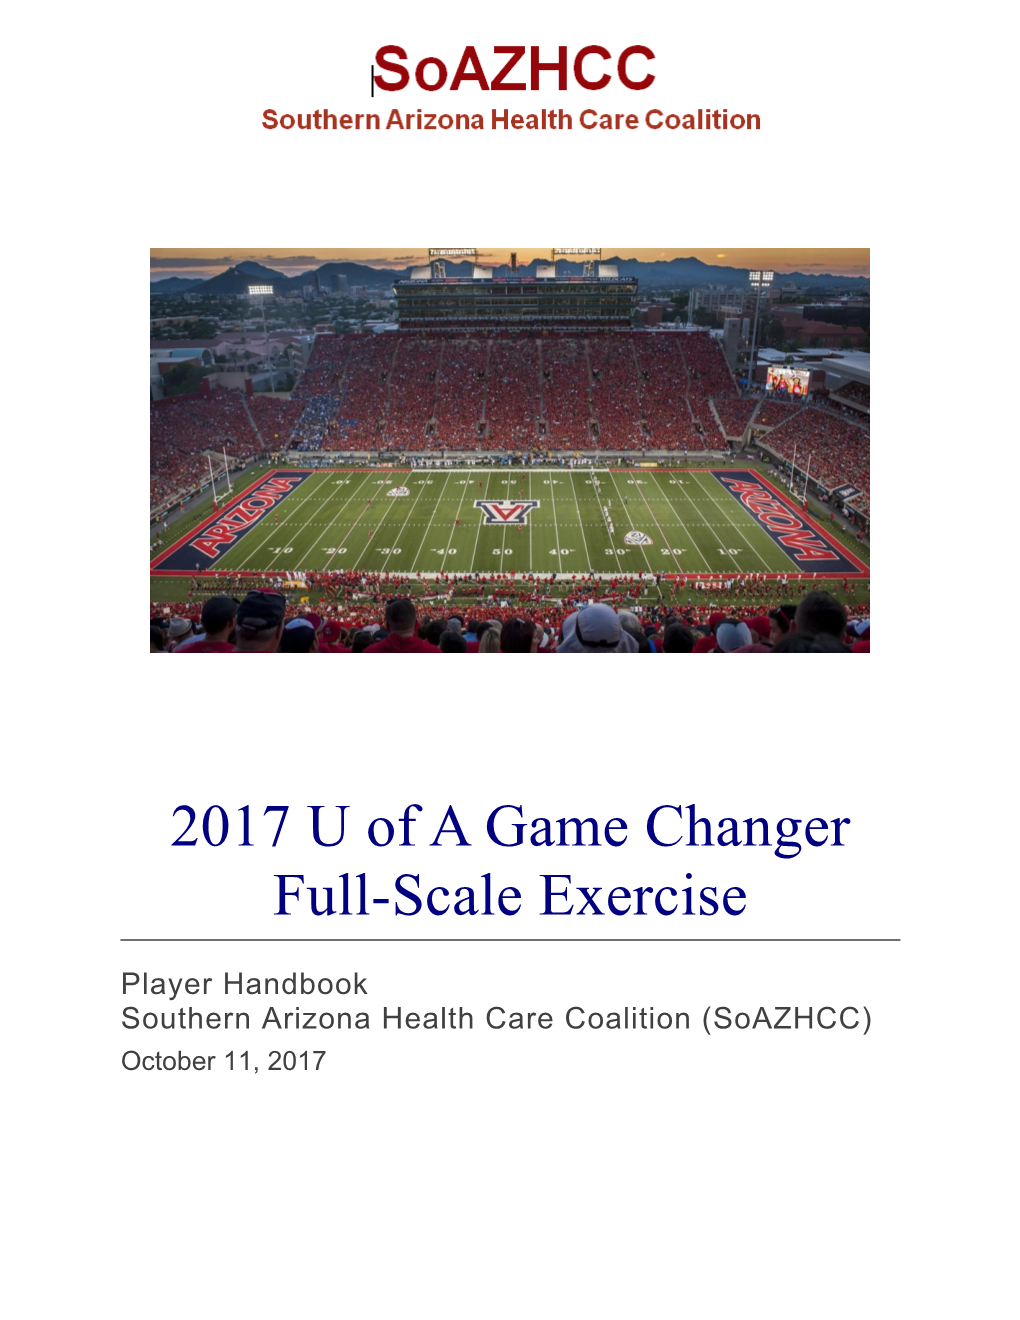 P Layer Handbook2017 U of a Game Changer Full-Scale Exercise